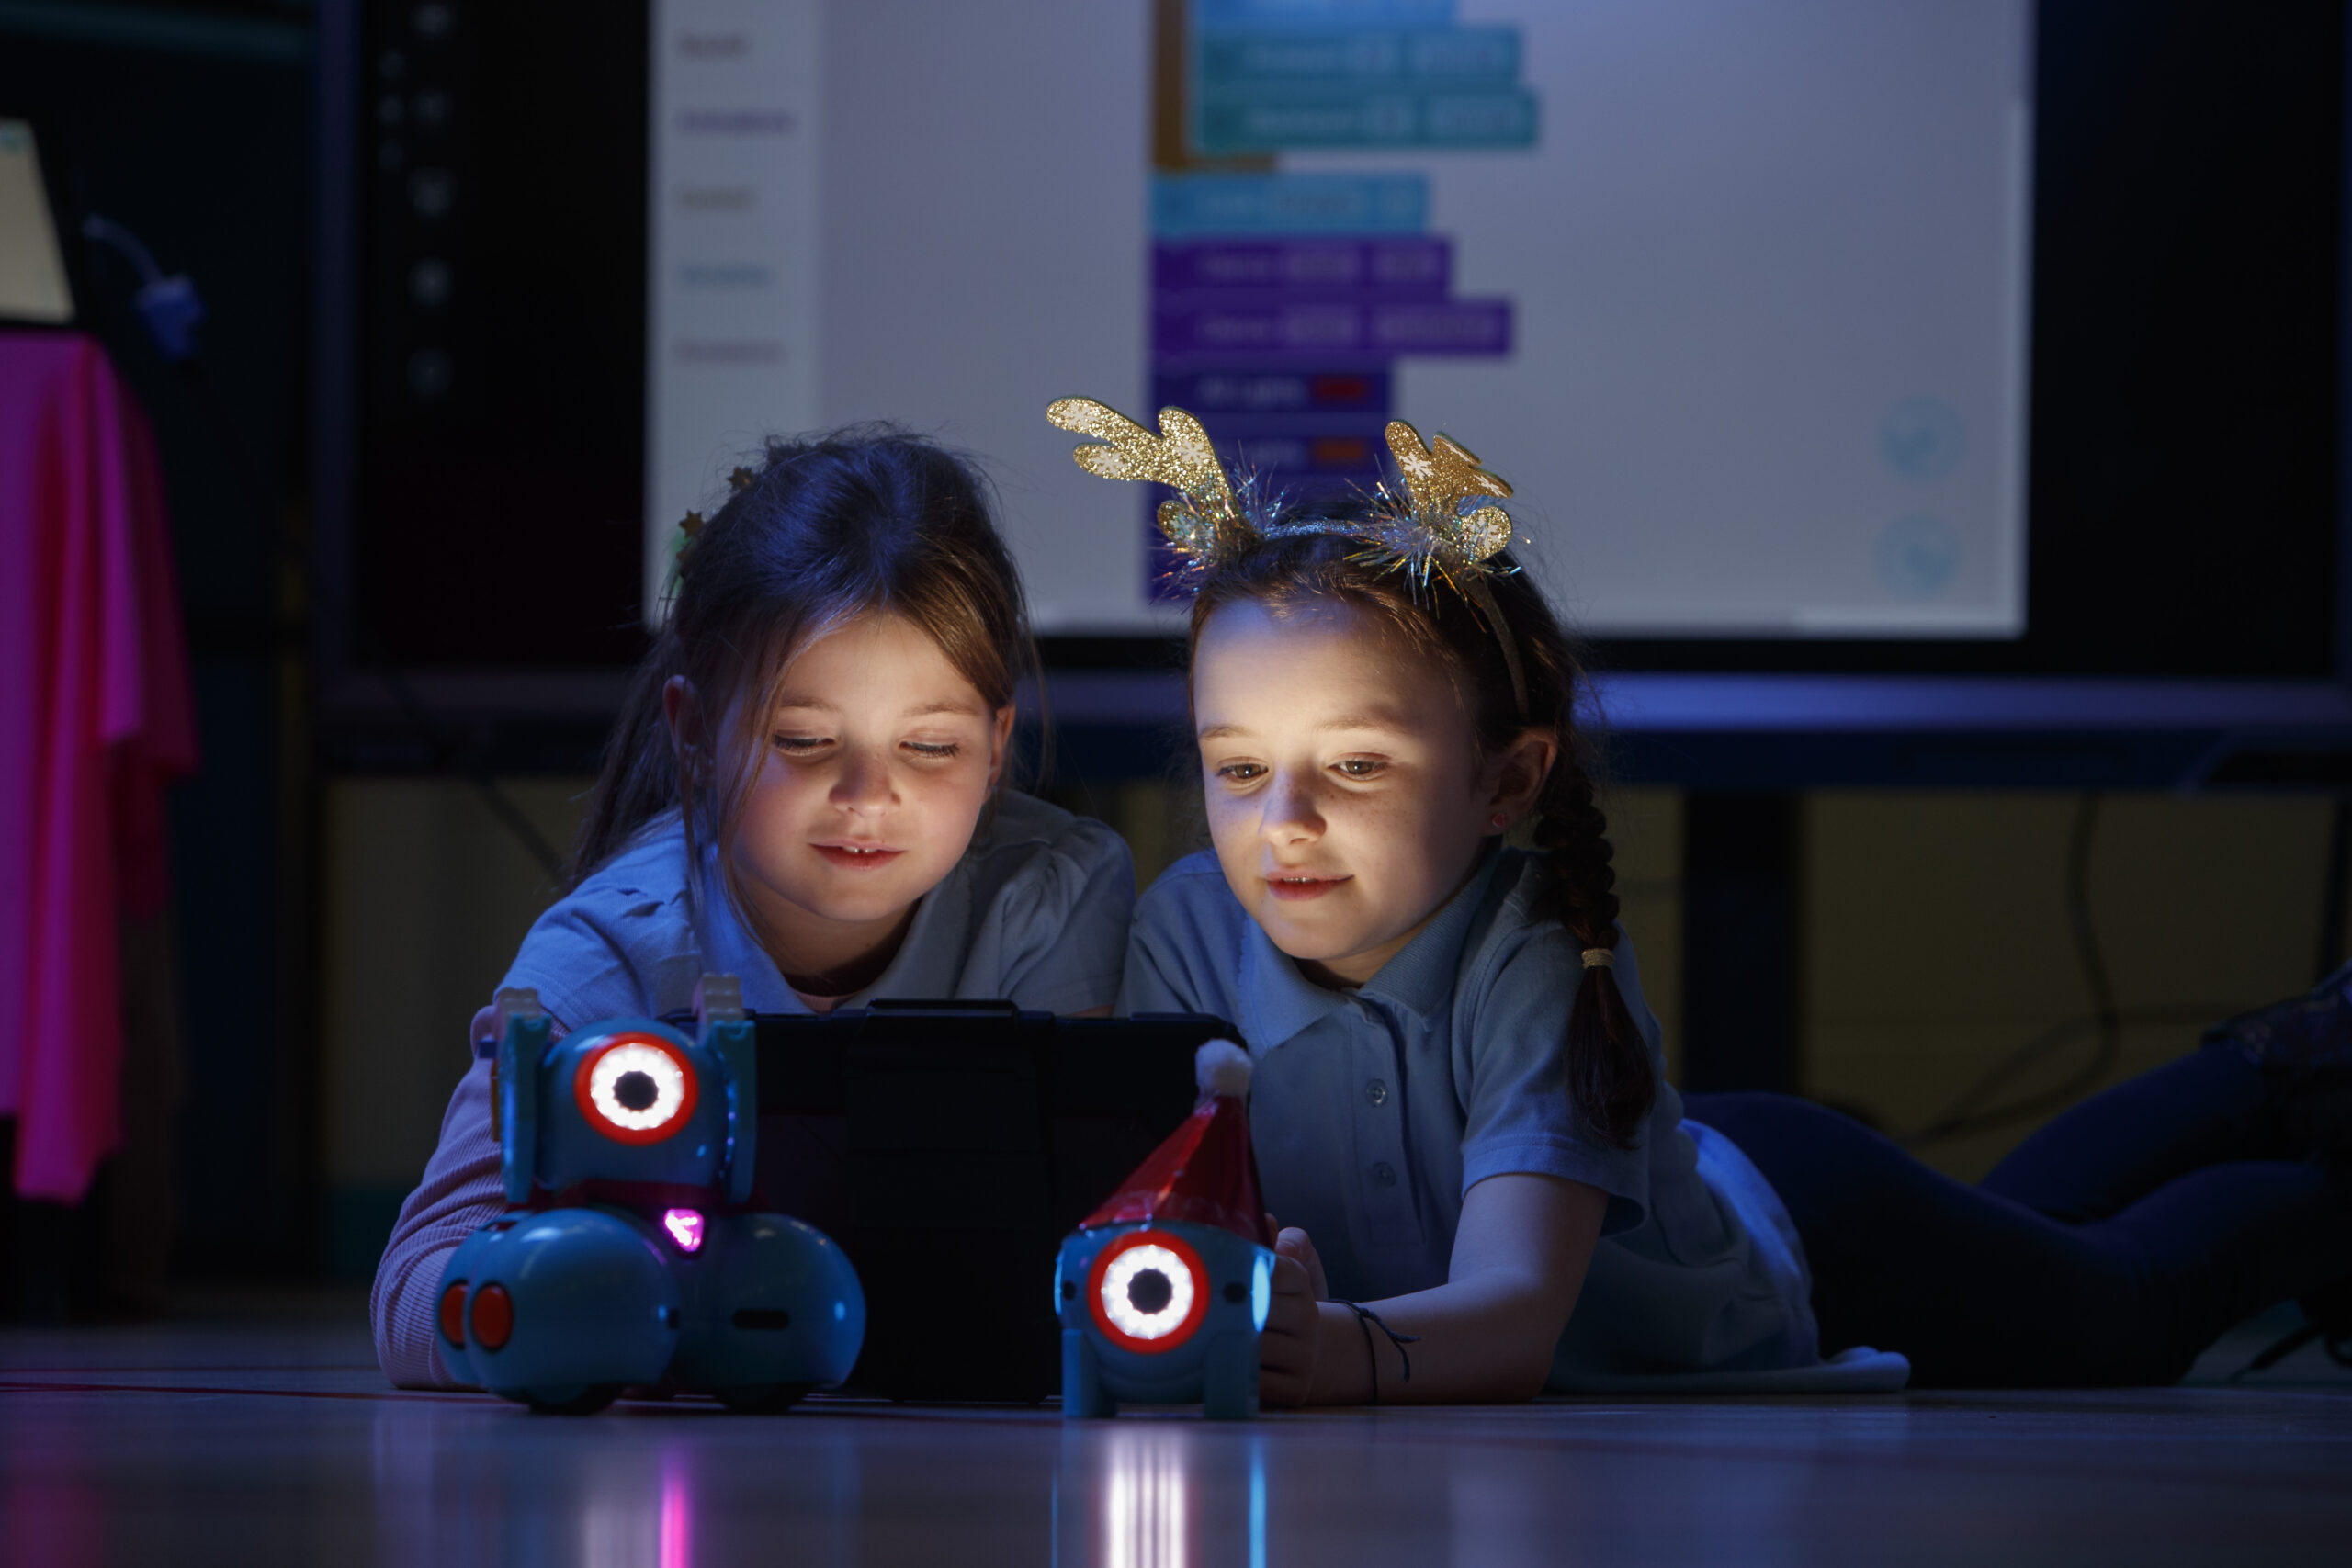 Southmuir Primary School is building a STEM workforce of the future thanks to its coding club for girls